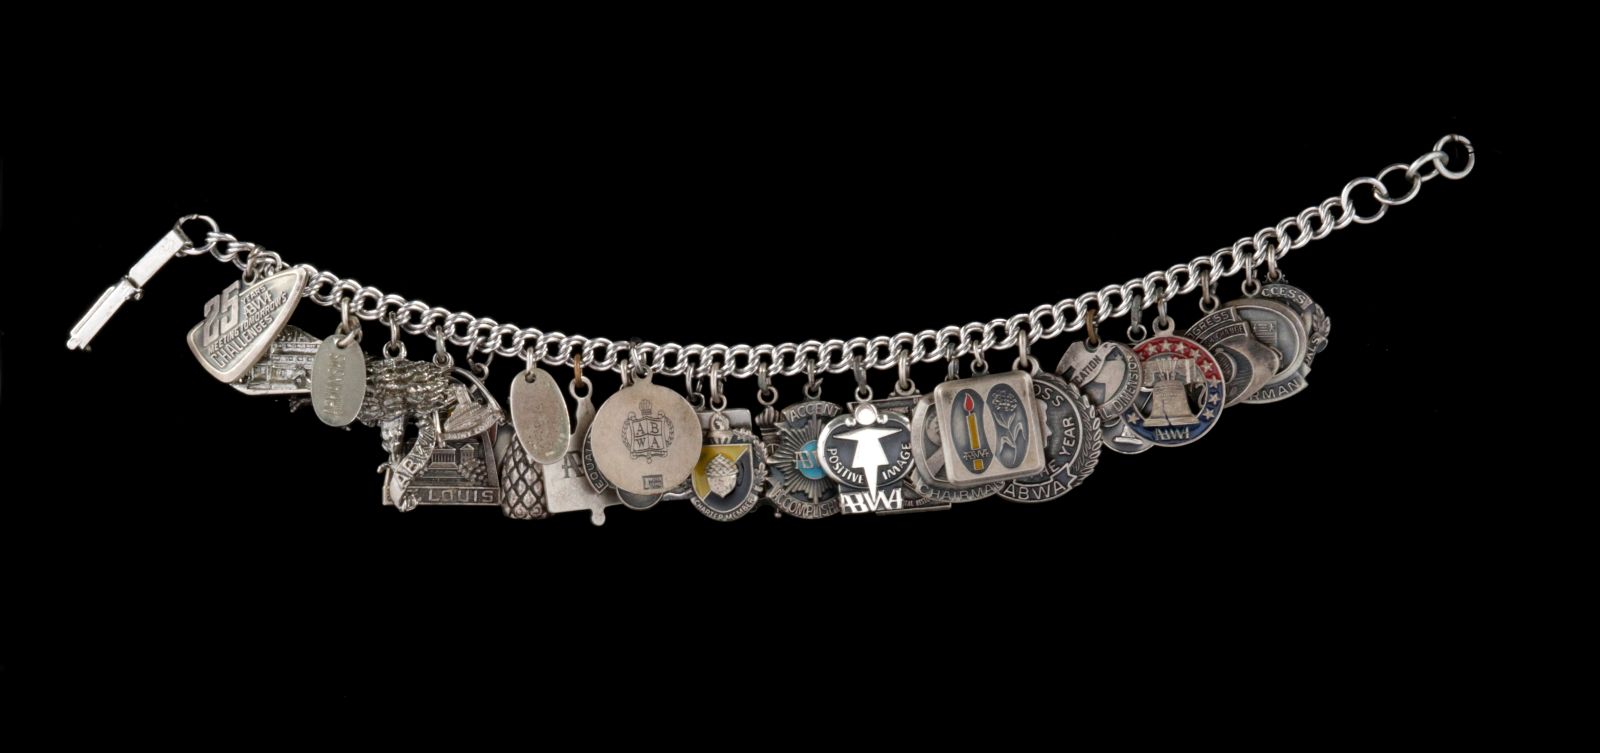 AN ABWA AWARDS BRACELET WITH 25 STERLING CHARMS